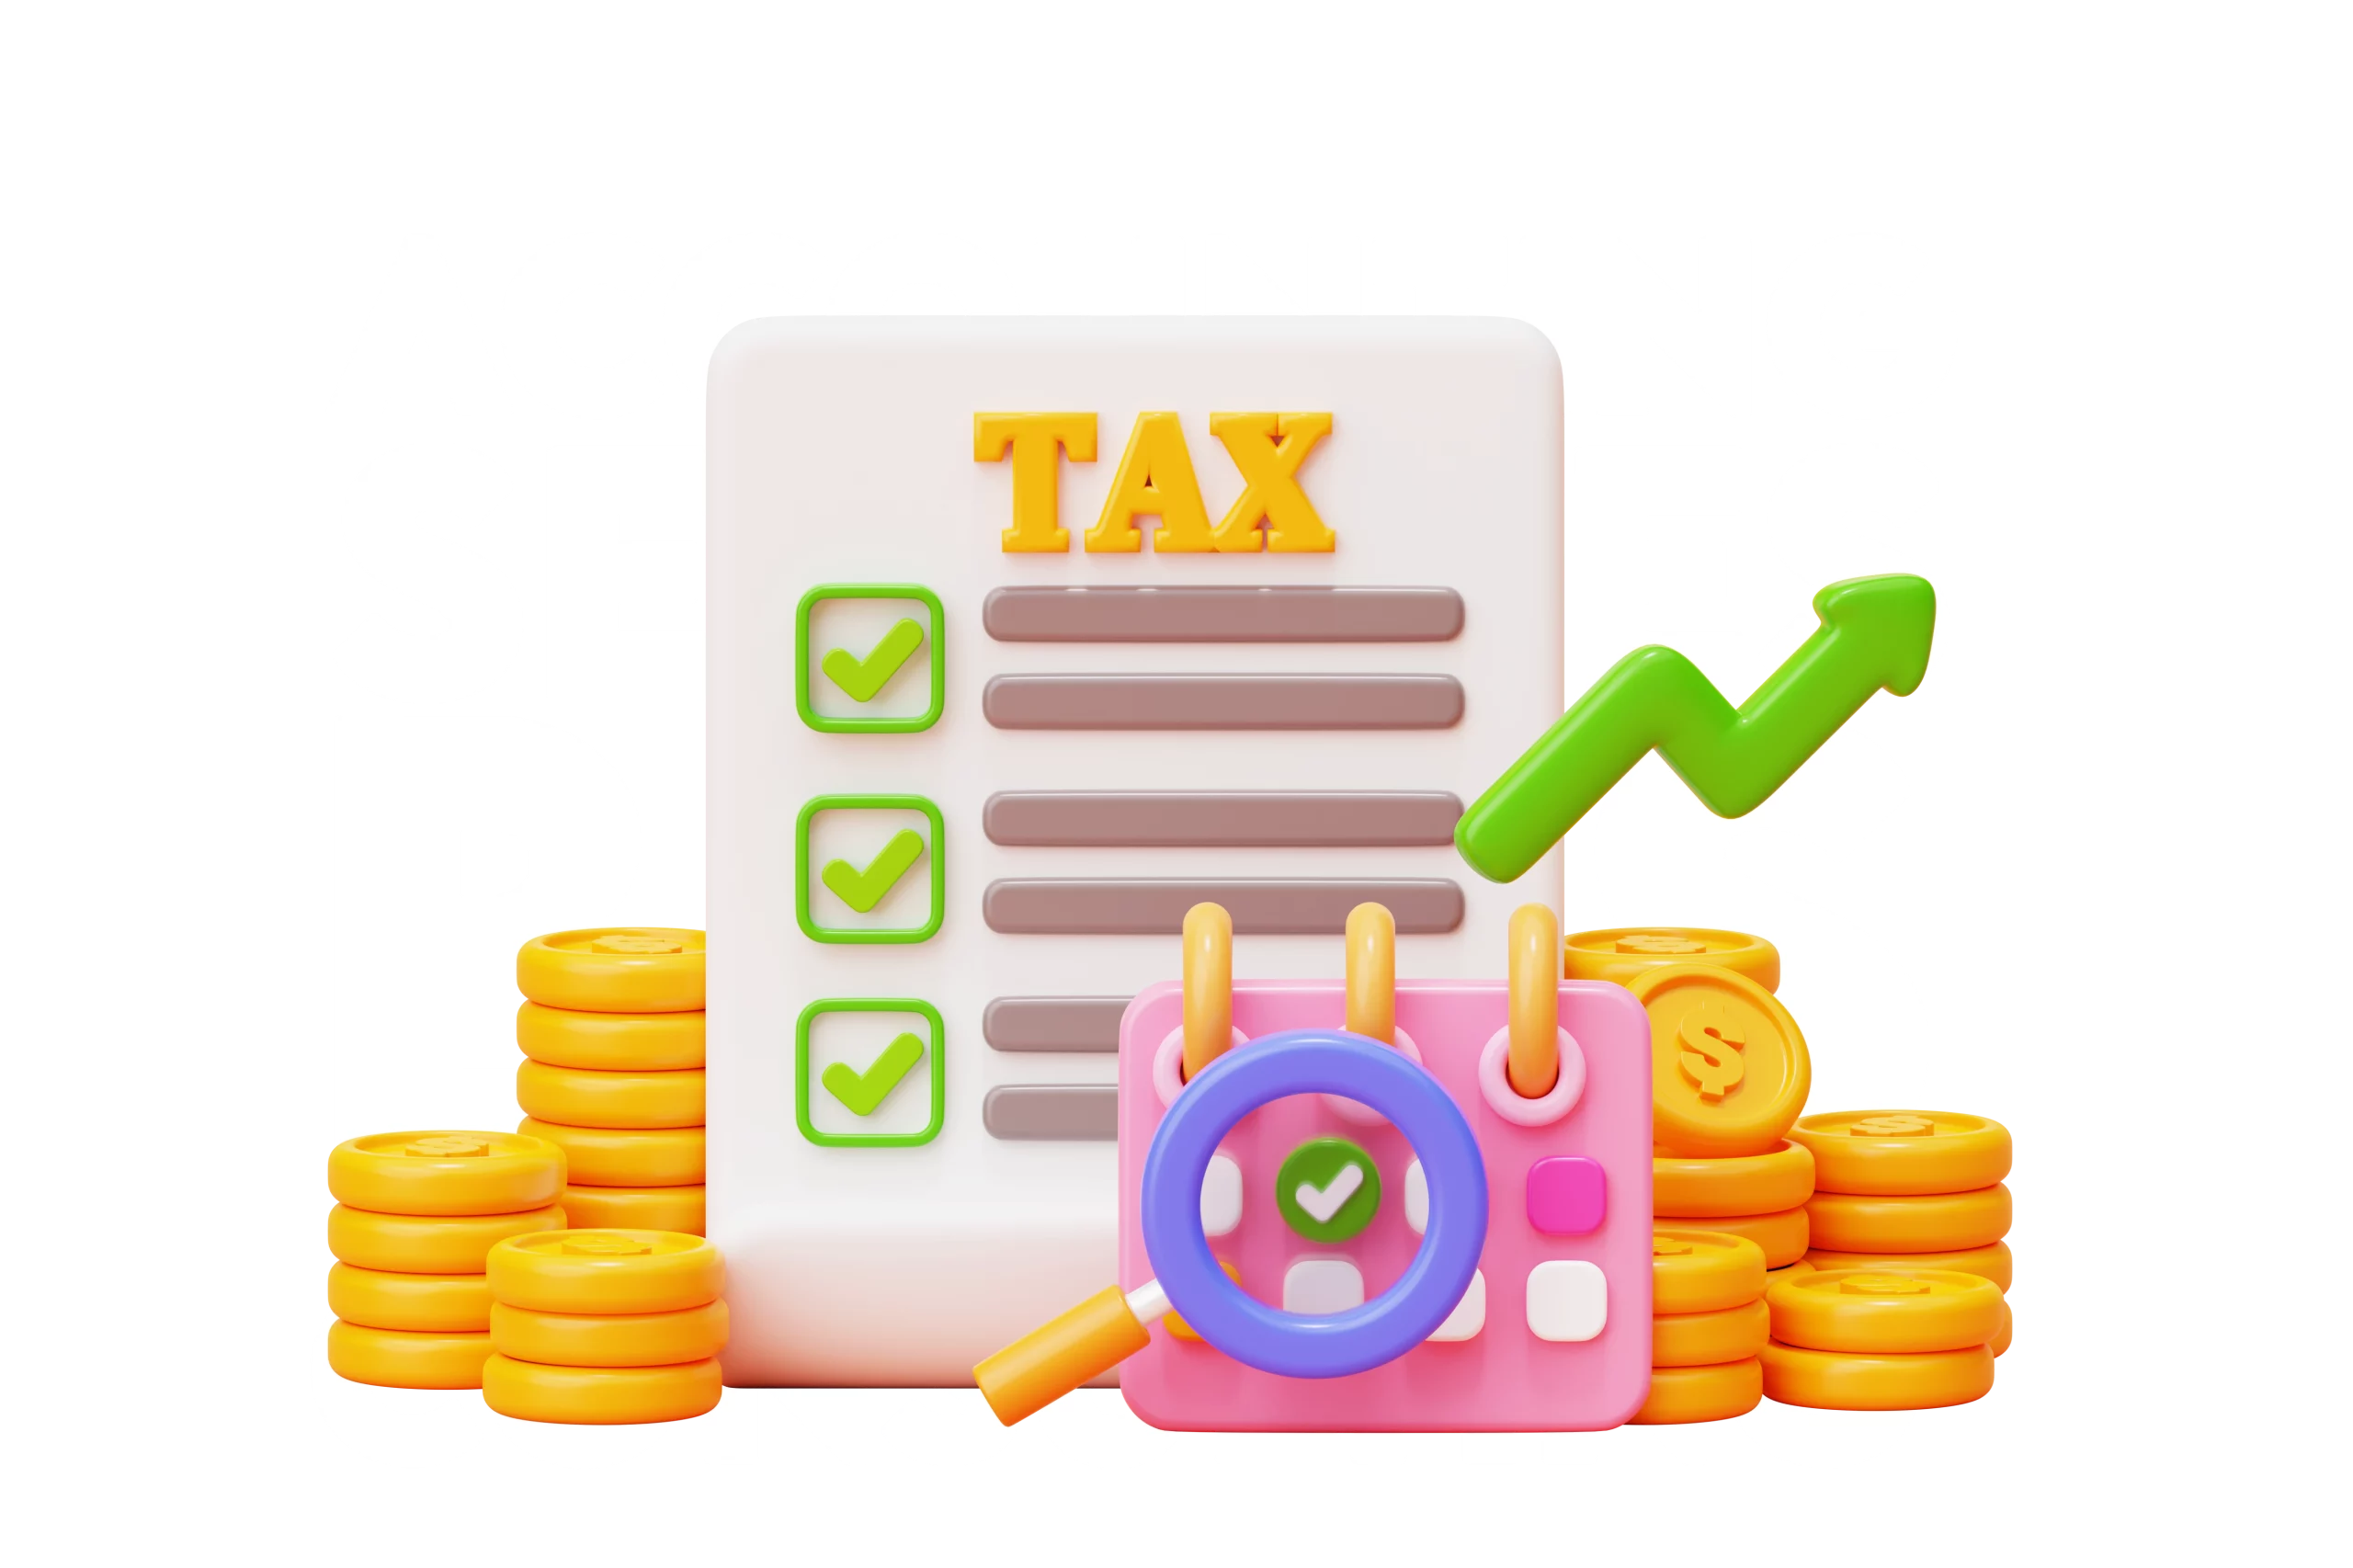 tax accounting service - bsns consulting - islamabad - pakistan